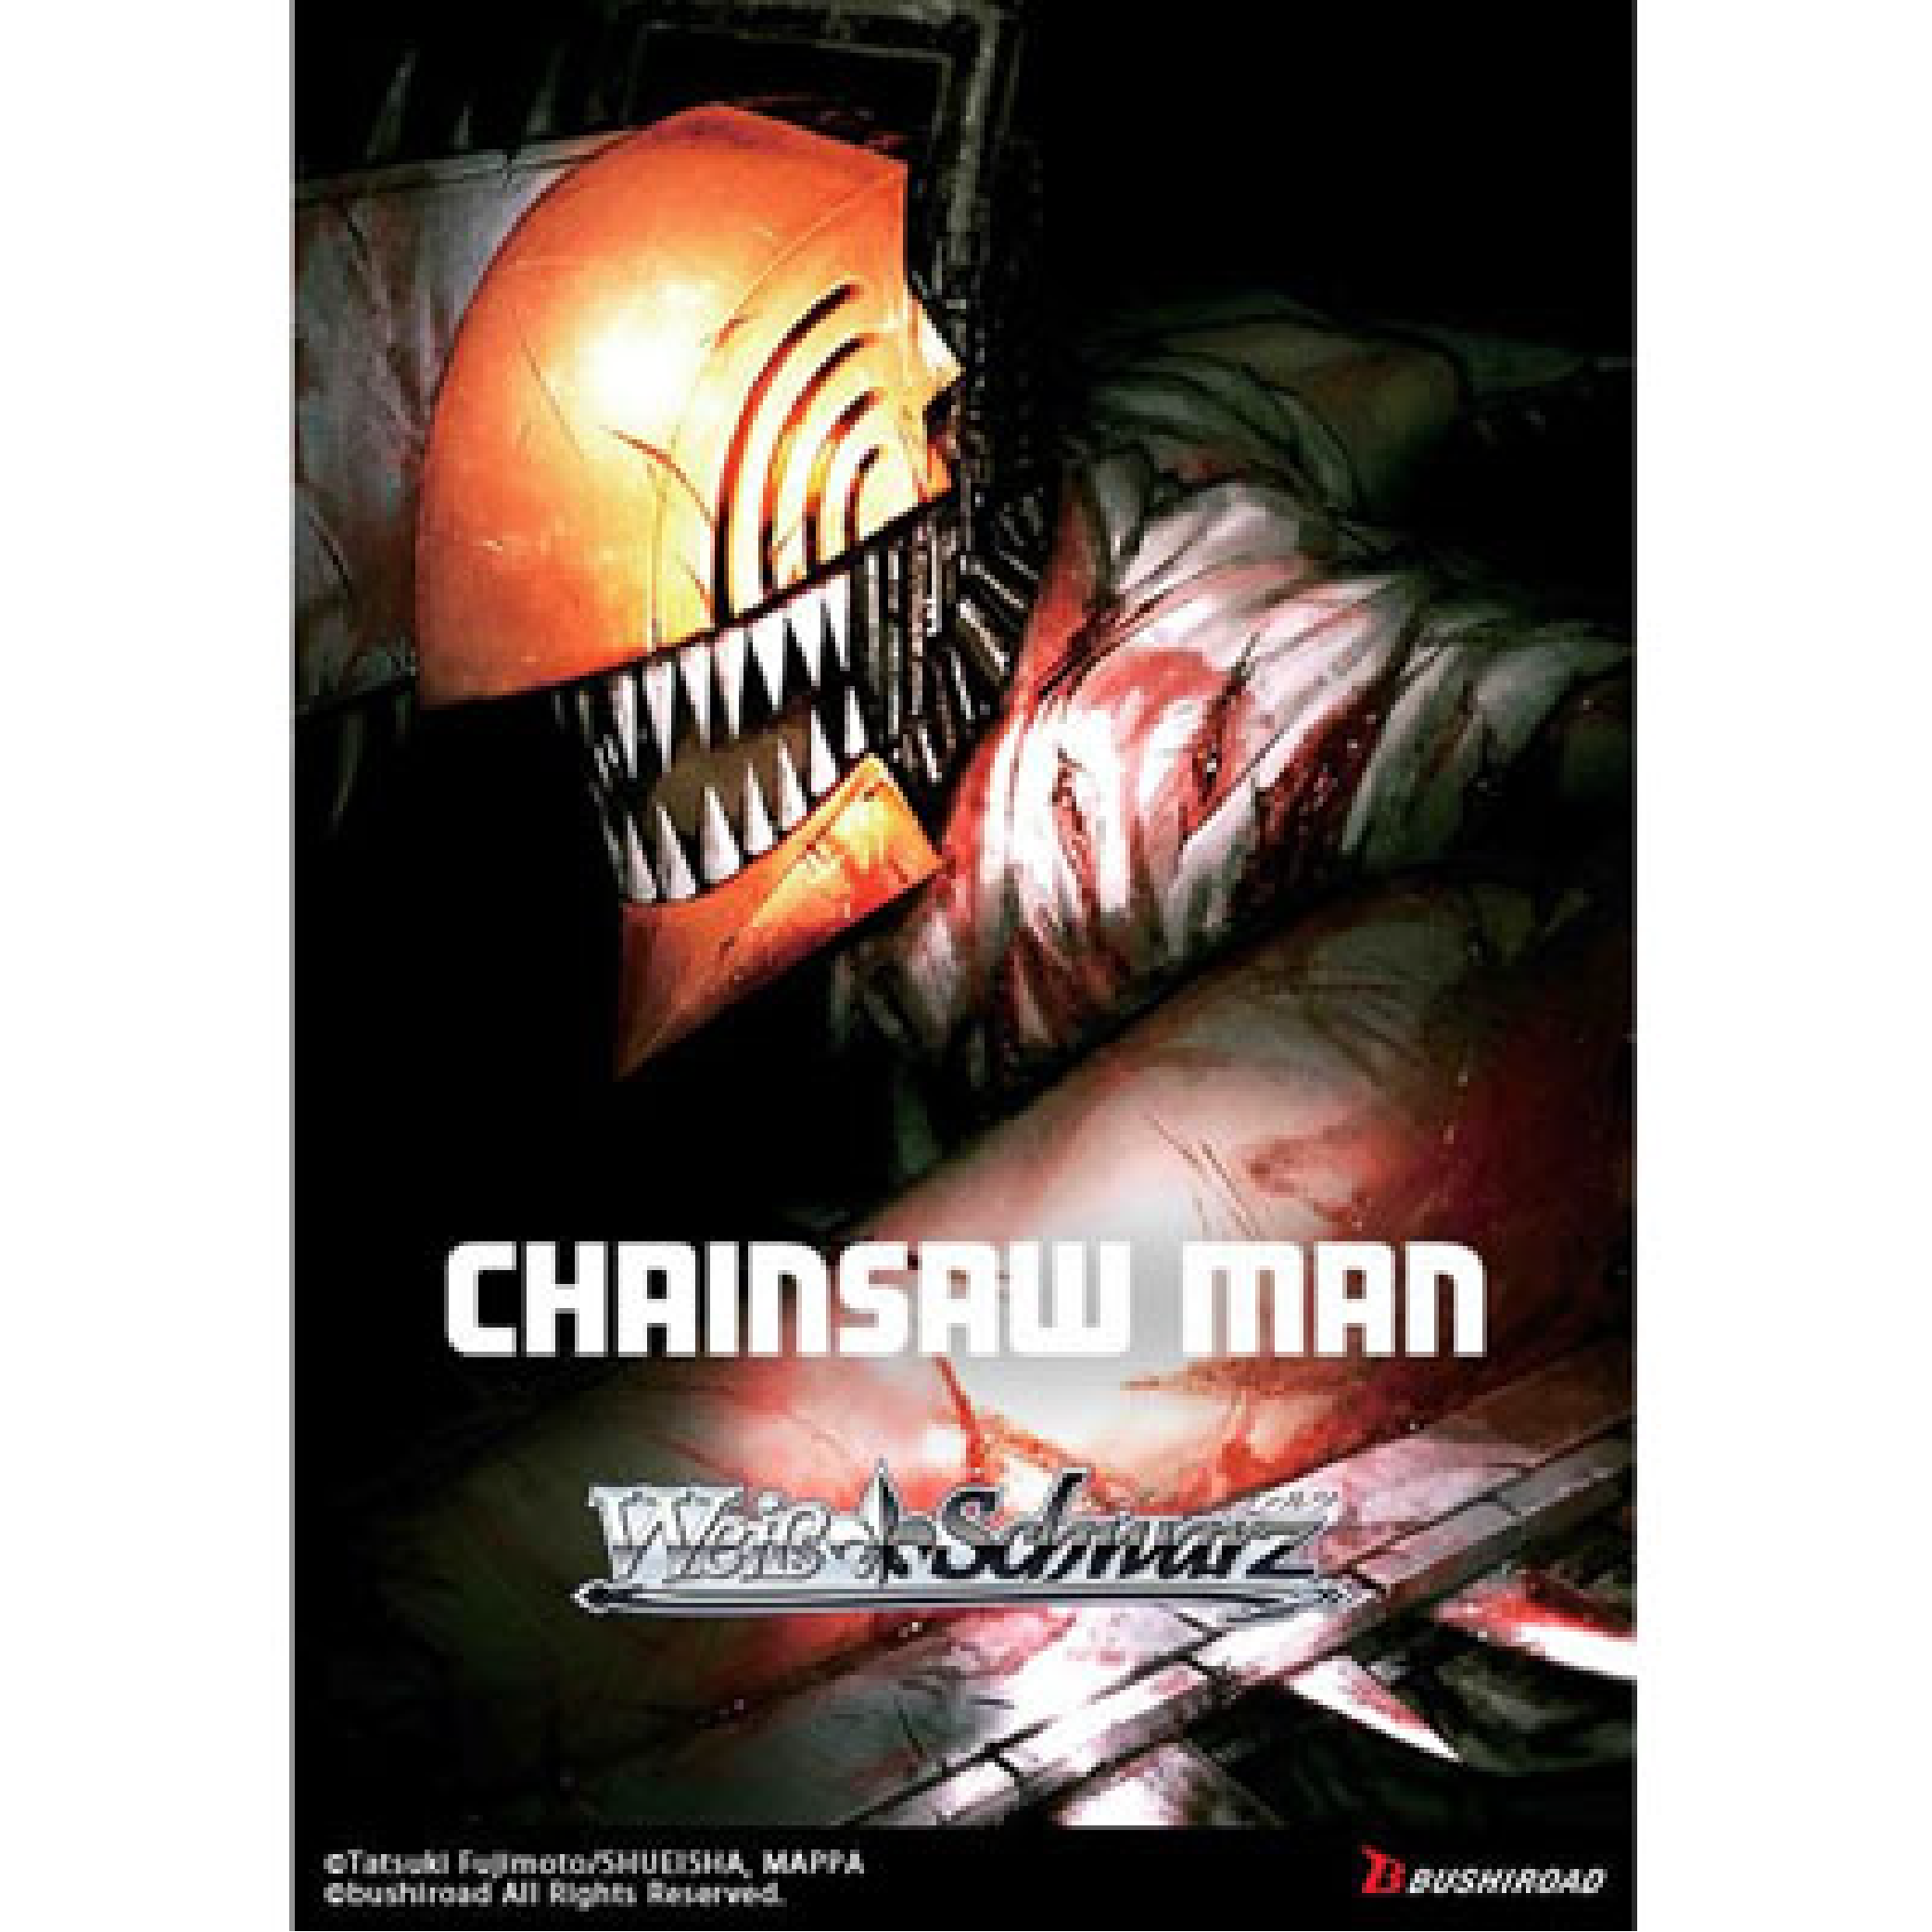 Chainsaw Man Poster Brings Its Leads to Center Stage